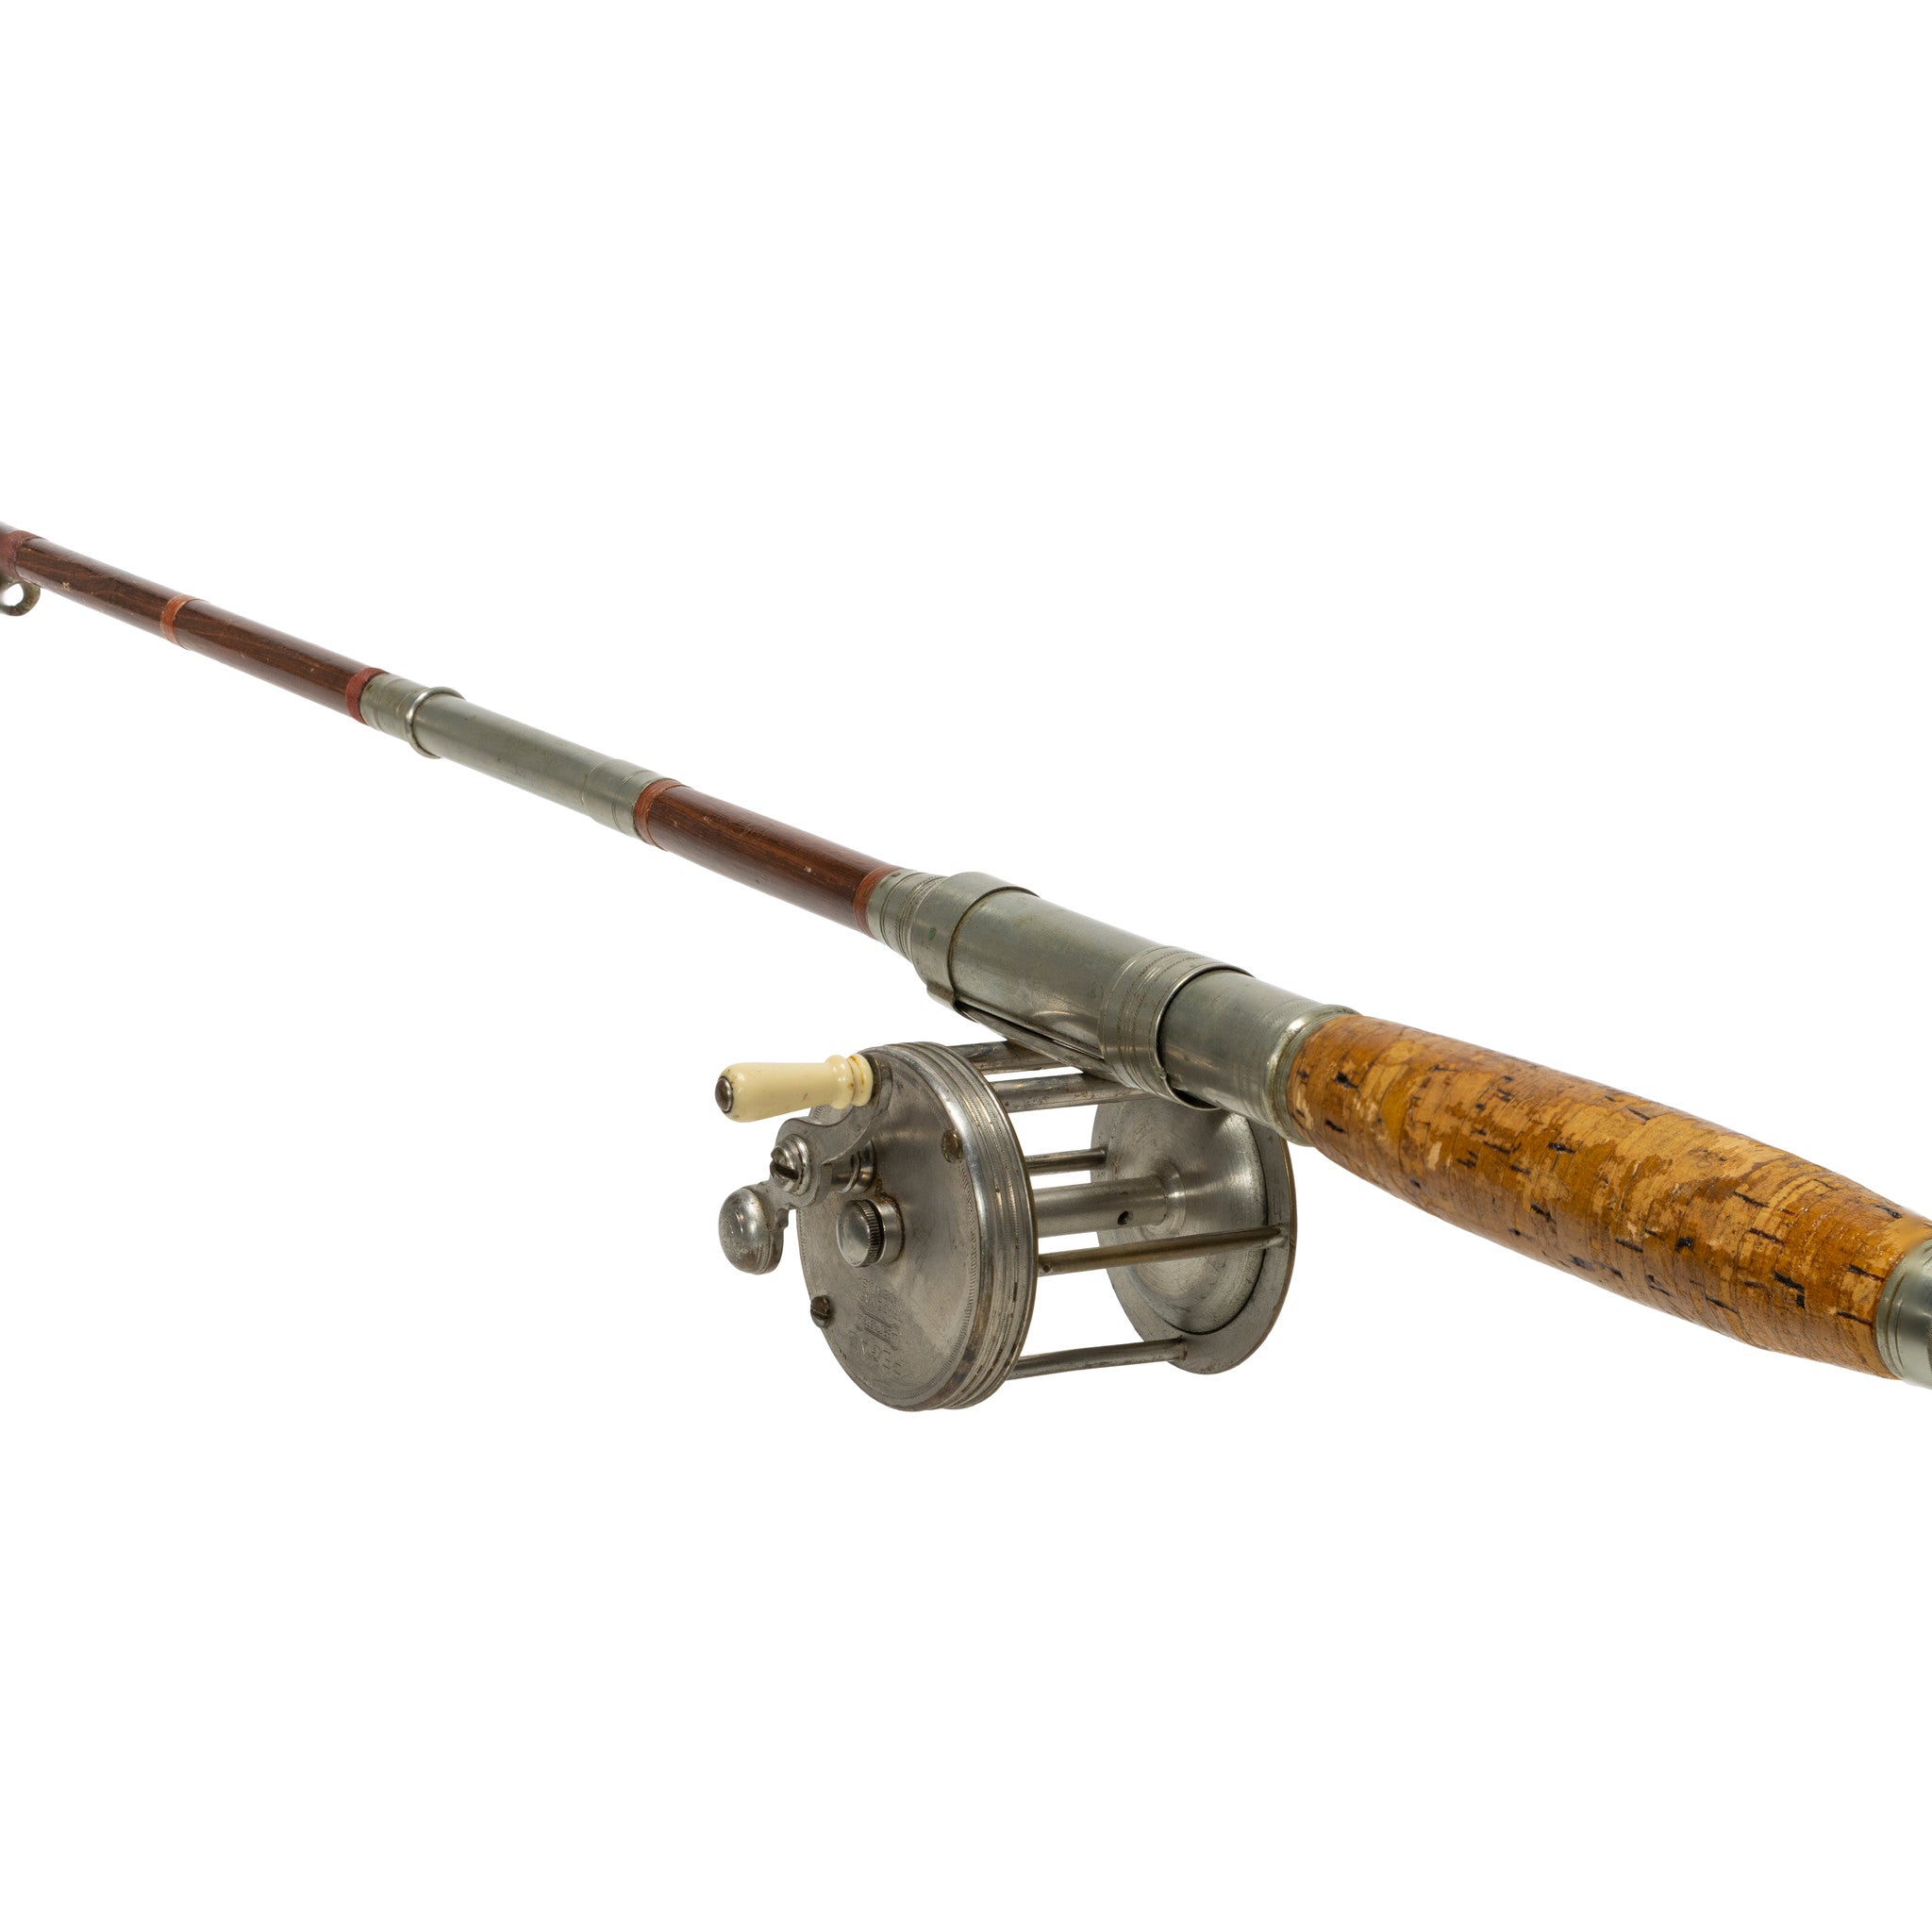 Early Bait Casting Rod and Reel